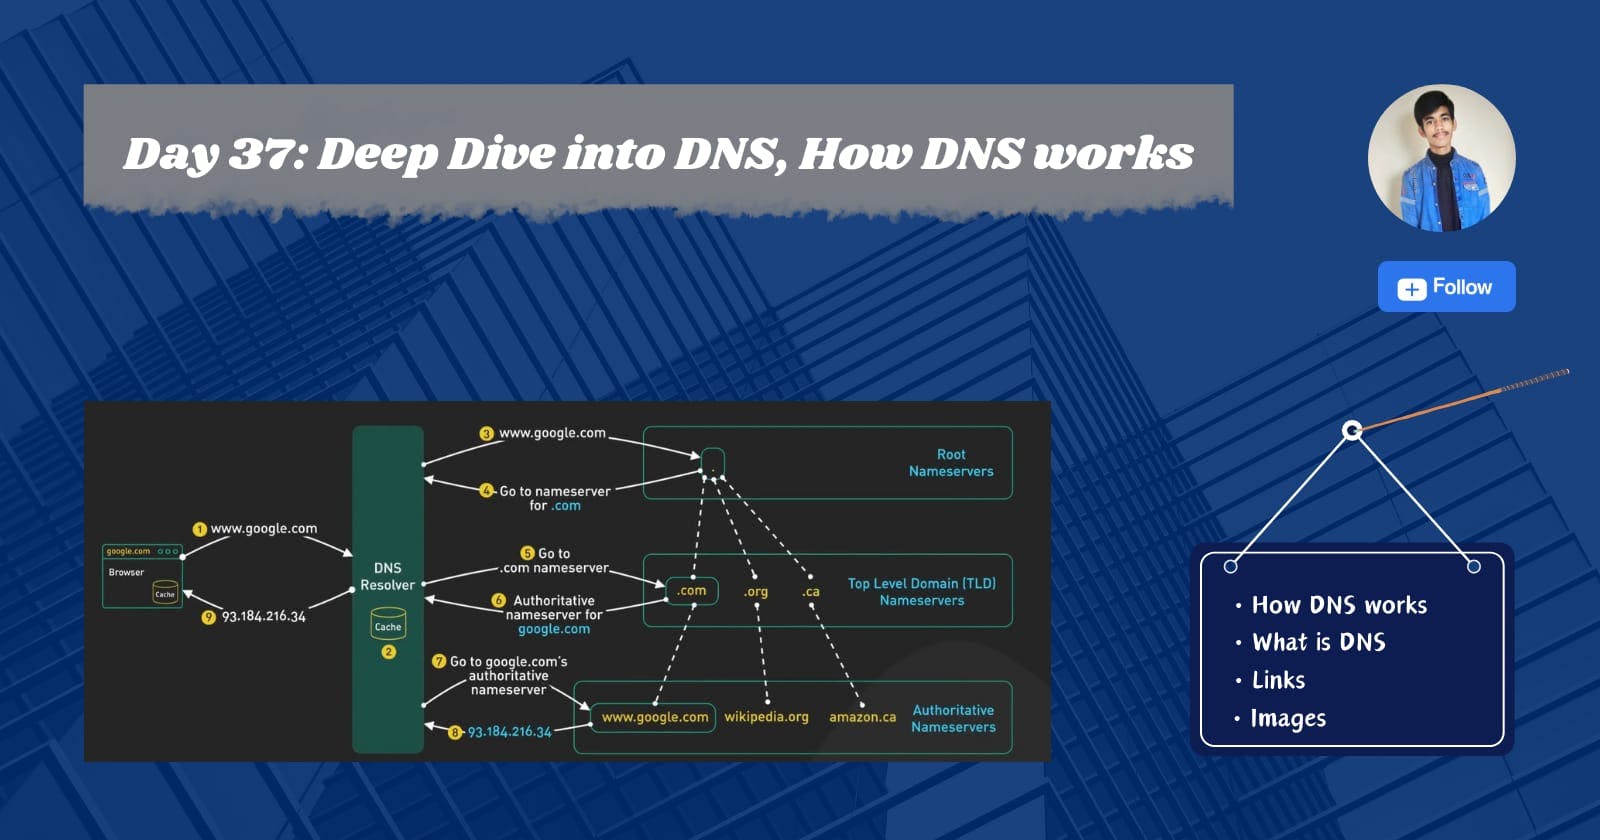 Day 37: Deep dive into DNS, How DNS works